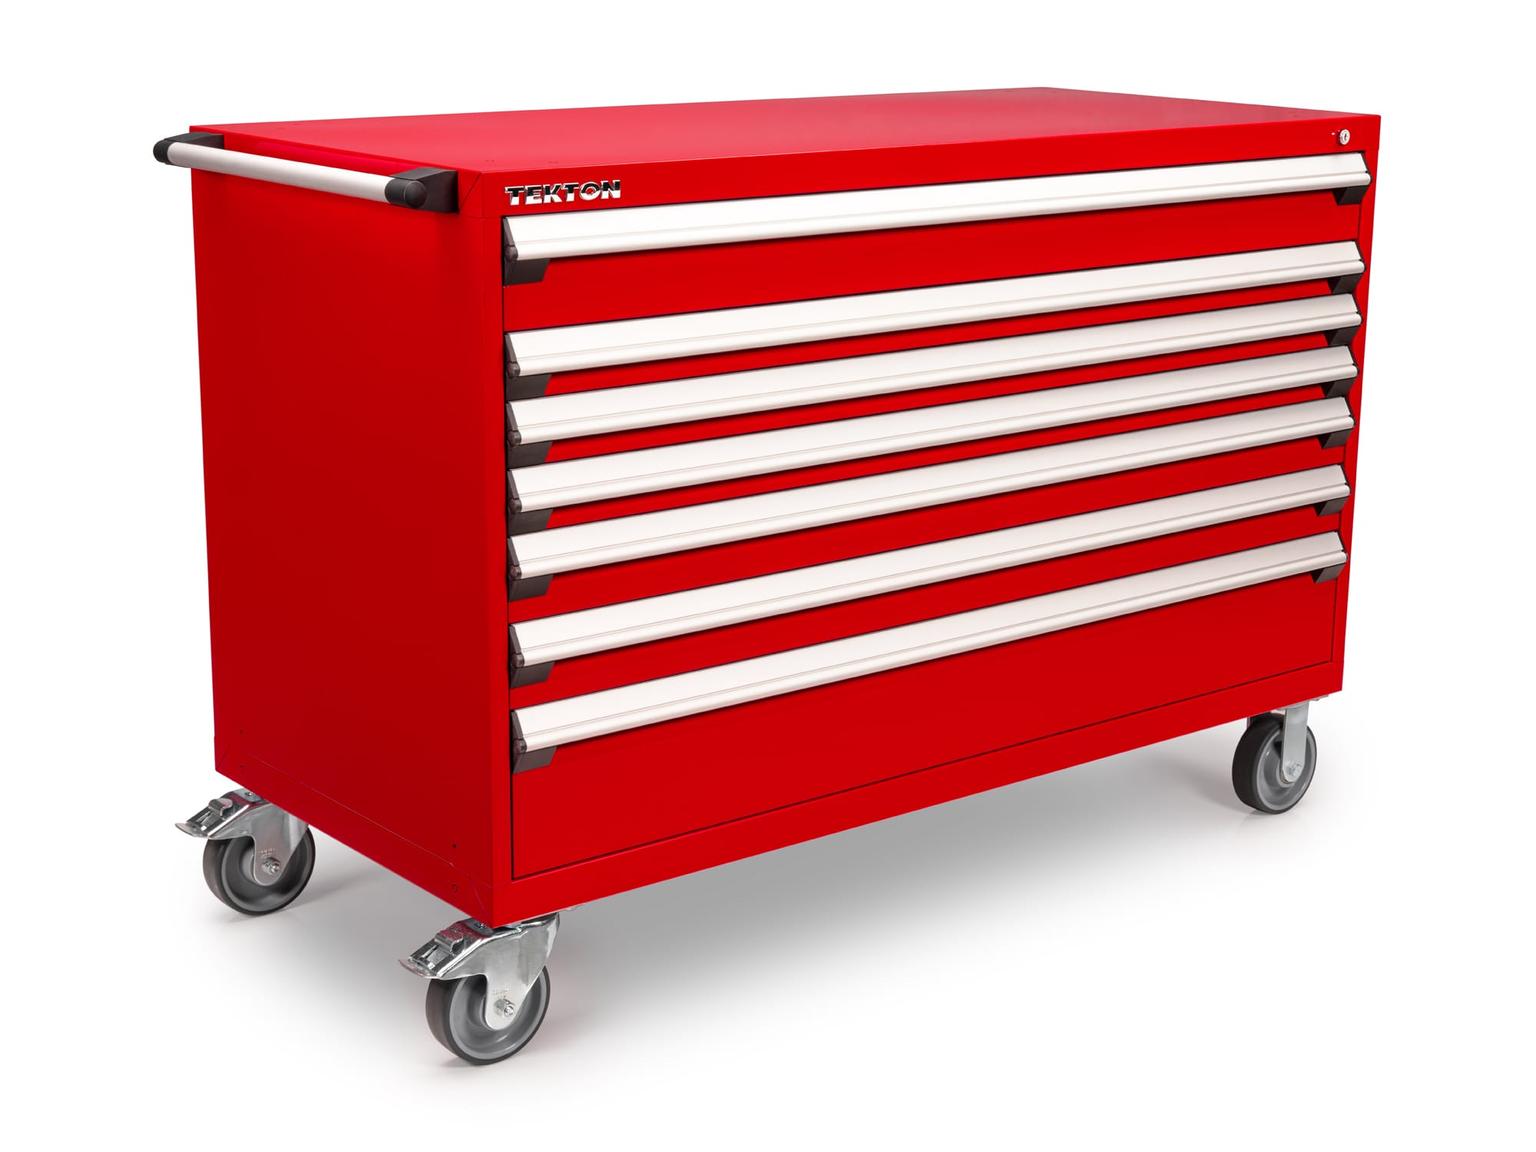 7-Drawer Tool Cabinet, Red (60 W x 27 D x 41.5 H in.)